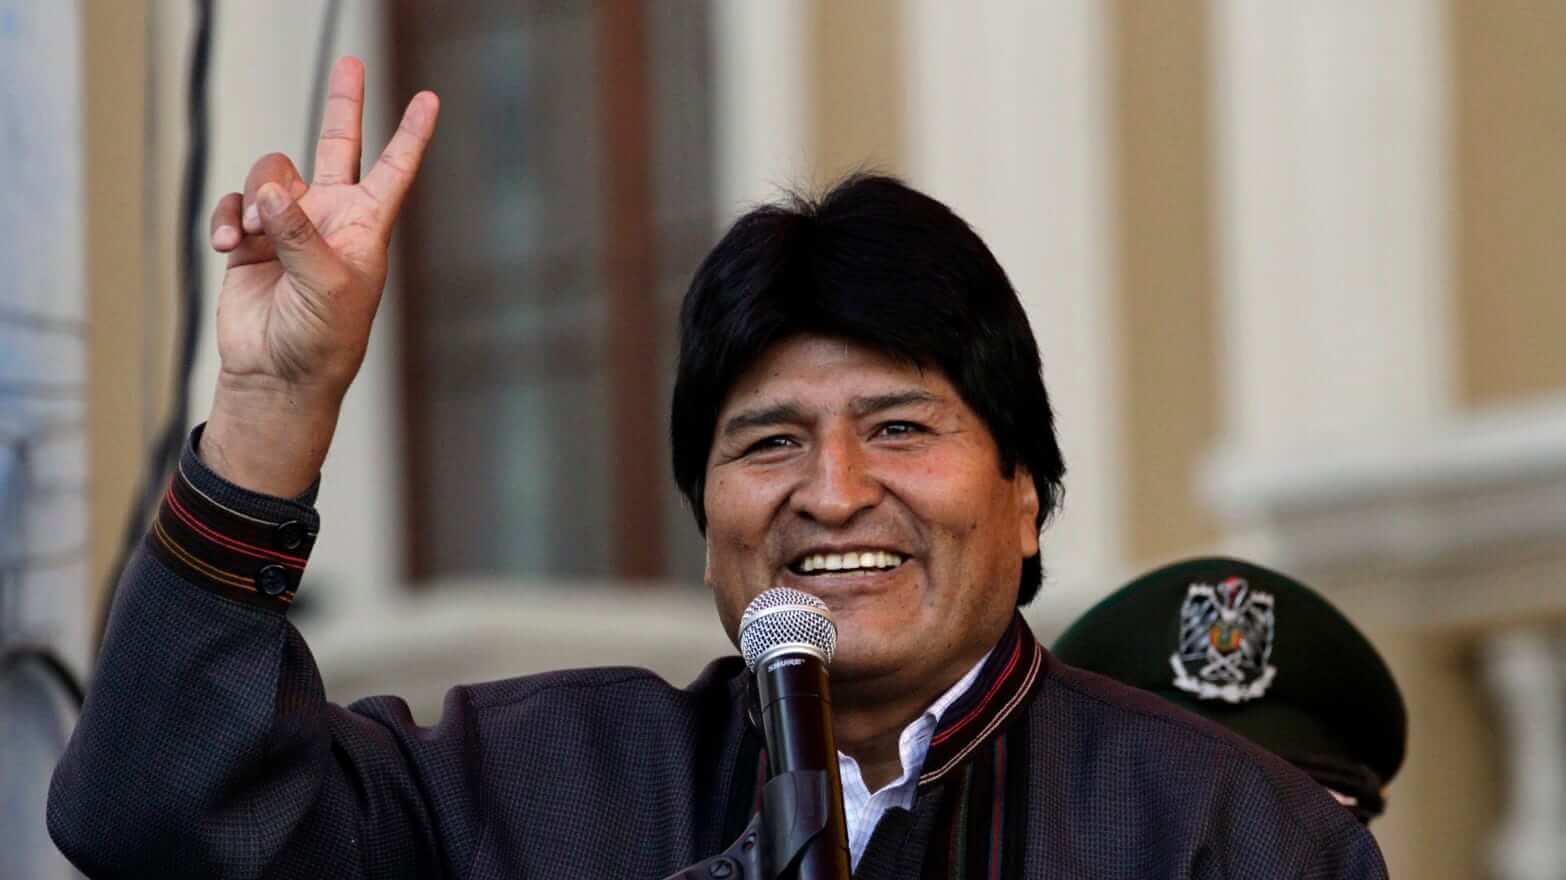 Ousted Former Bolivian President Morales Barred From Contesting Senate Elections